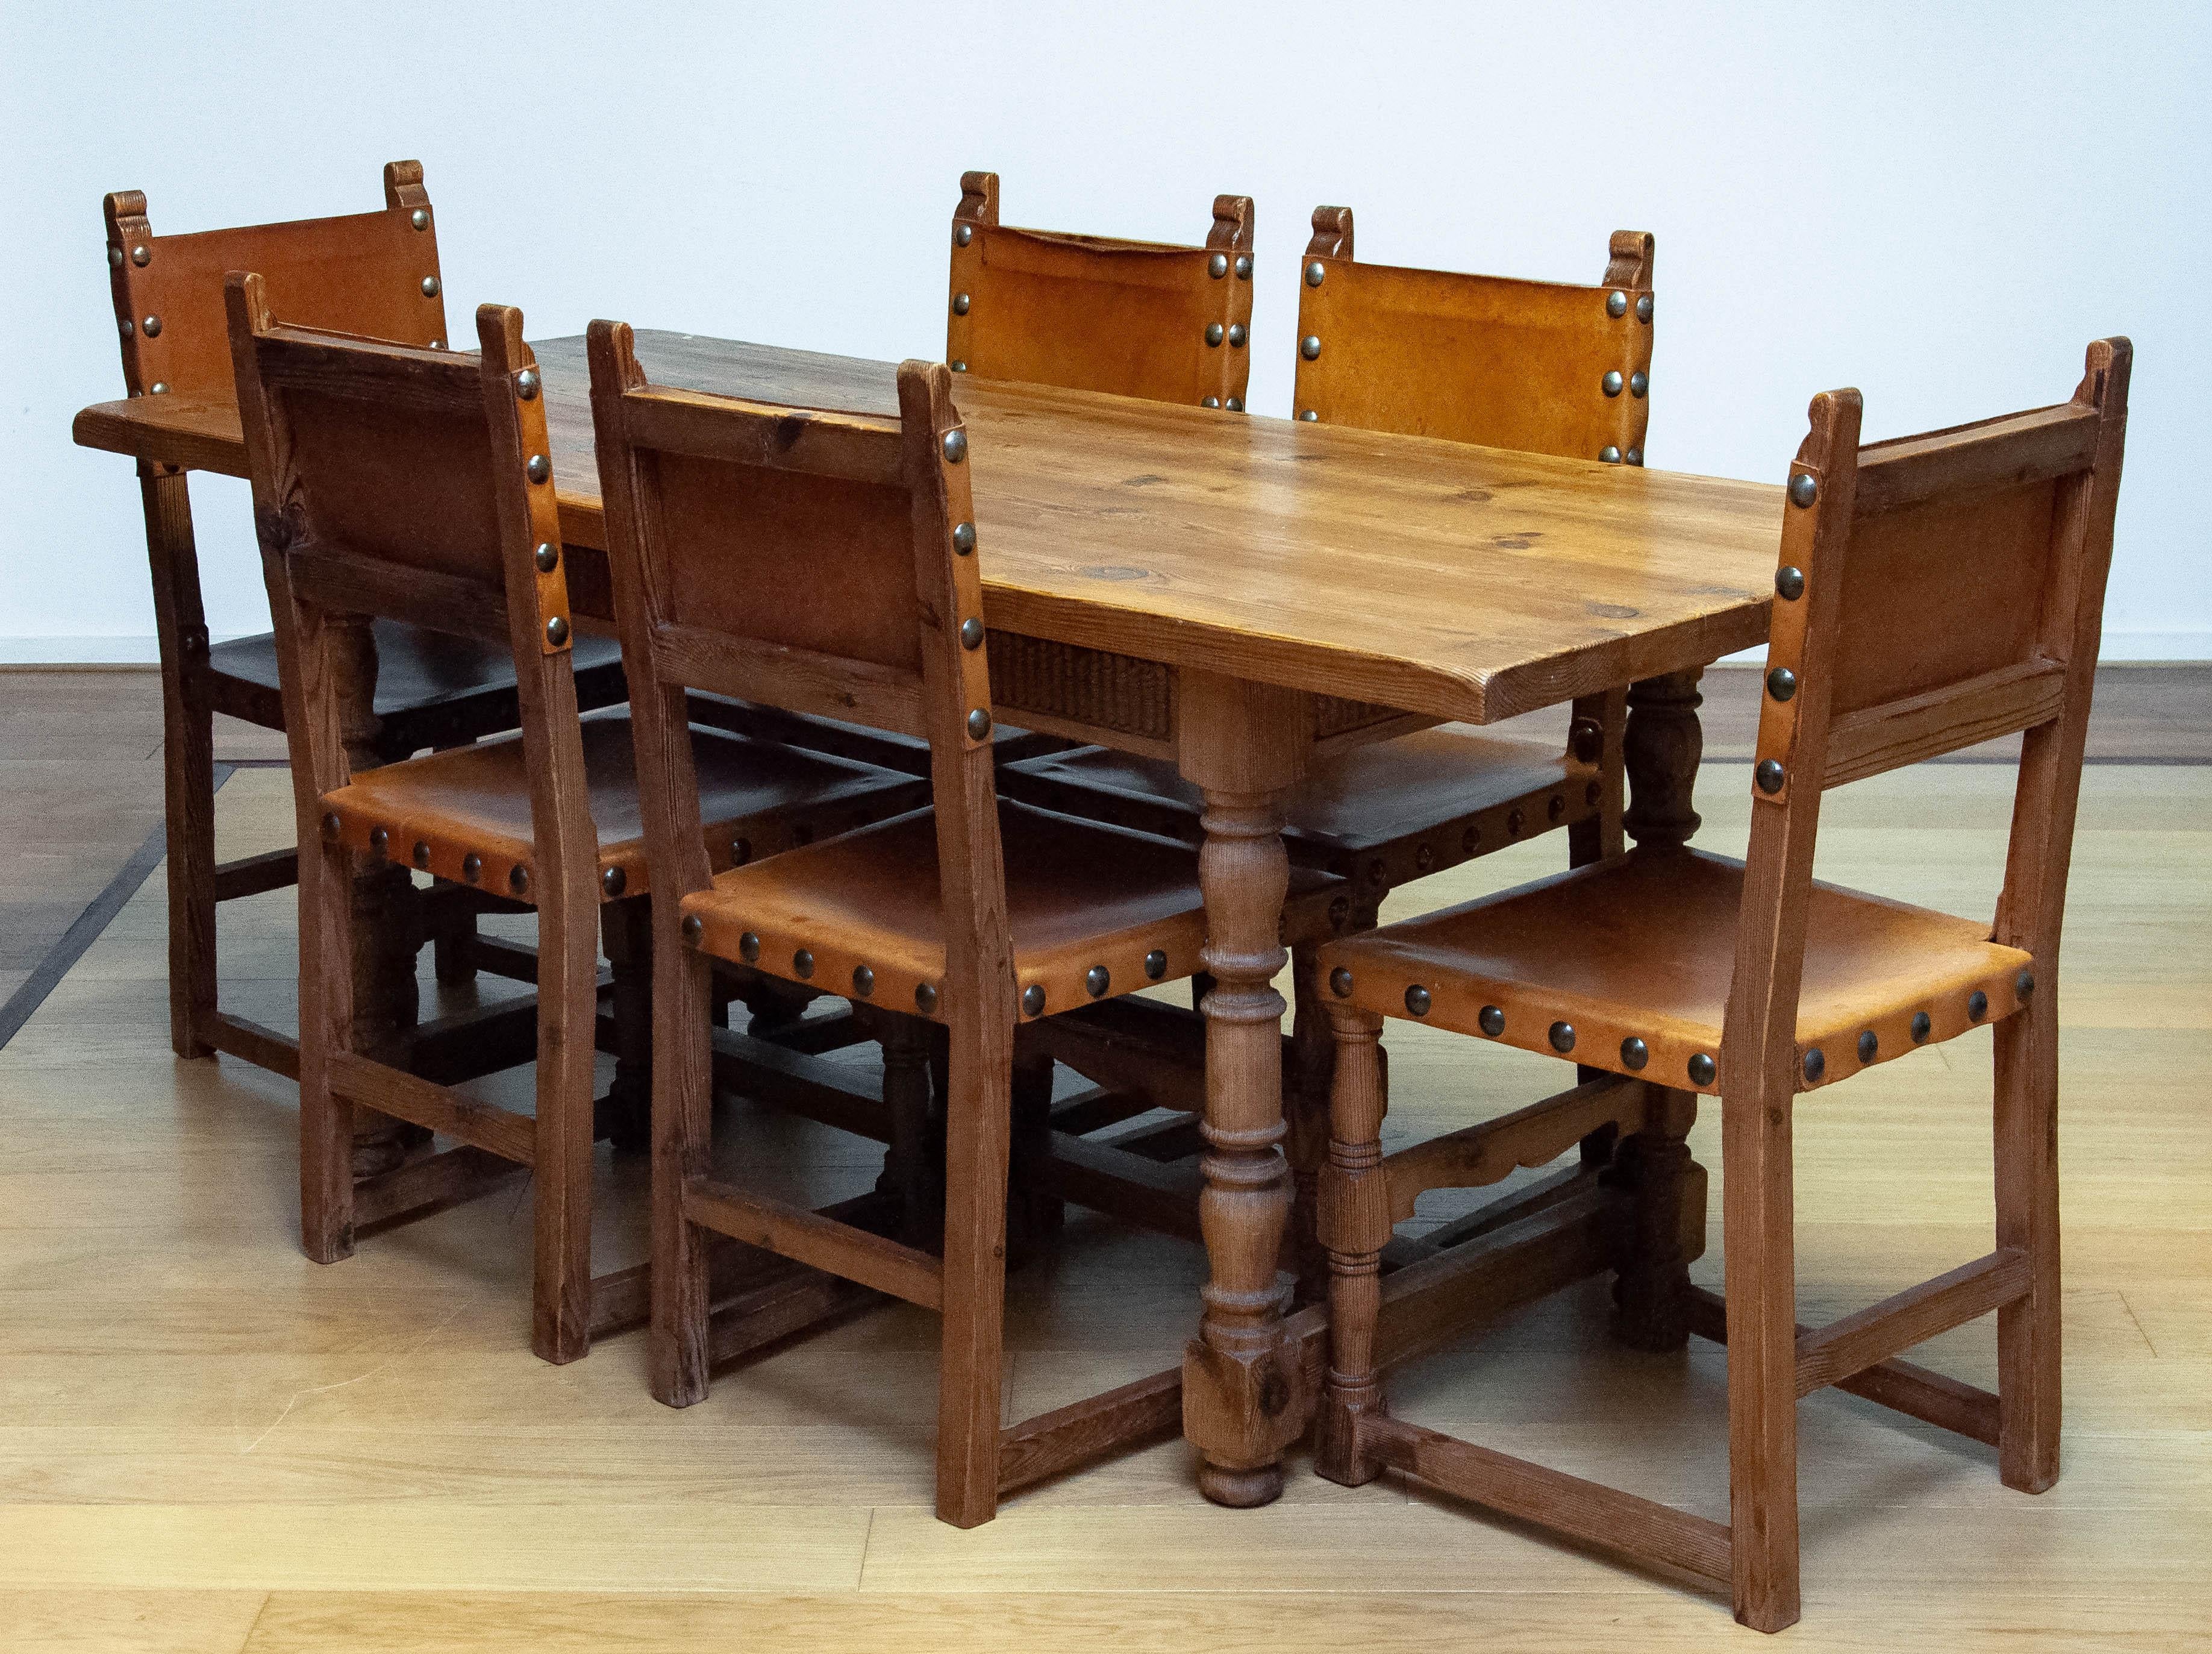 Absolutely beautiful late 19th century Swedish 'Folk Art' country farm dining table in pine with six matching pine dining chairs inline and sturdy tan leather. Because of the dry-out pine grain, true al these years, this set has a fantastic 'lived